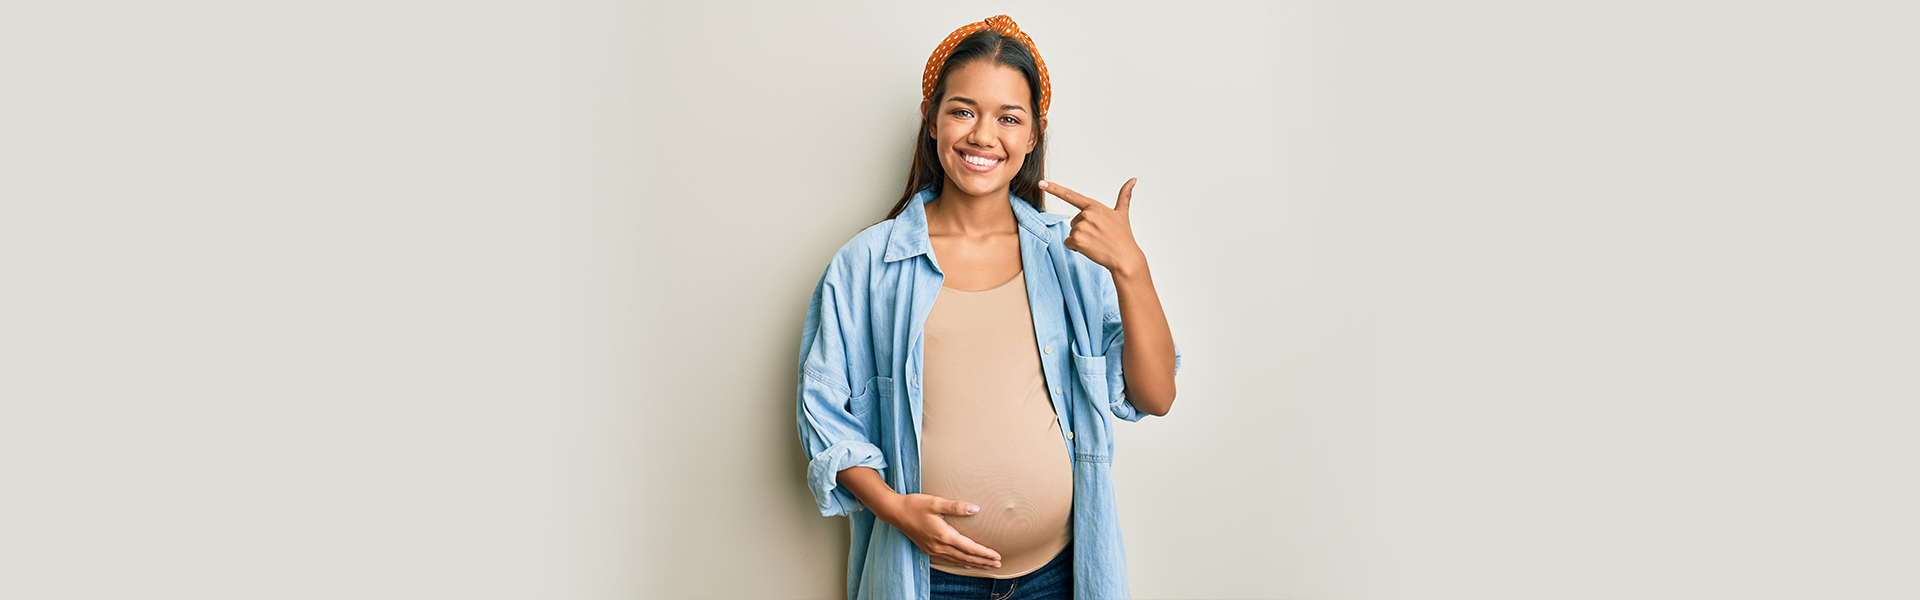 Is Teeth Whitening Safe During Pregnancy?